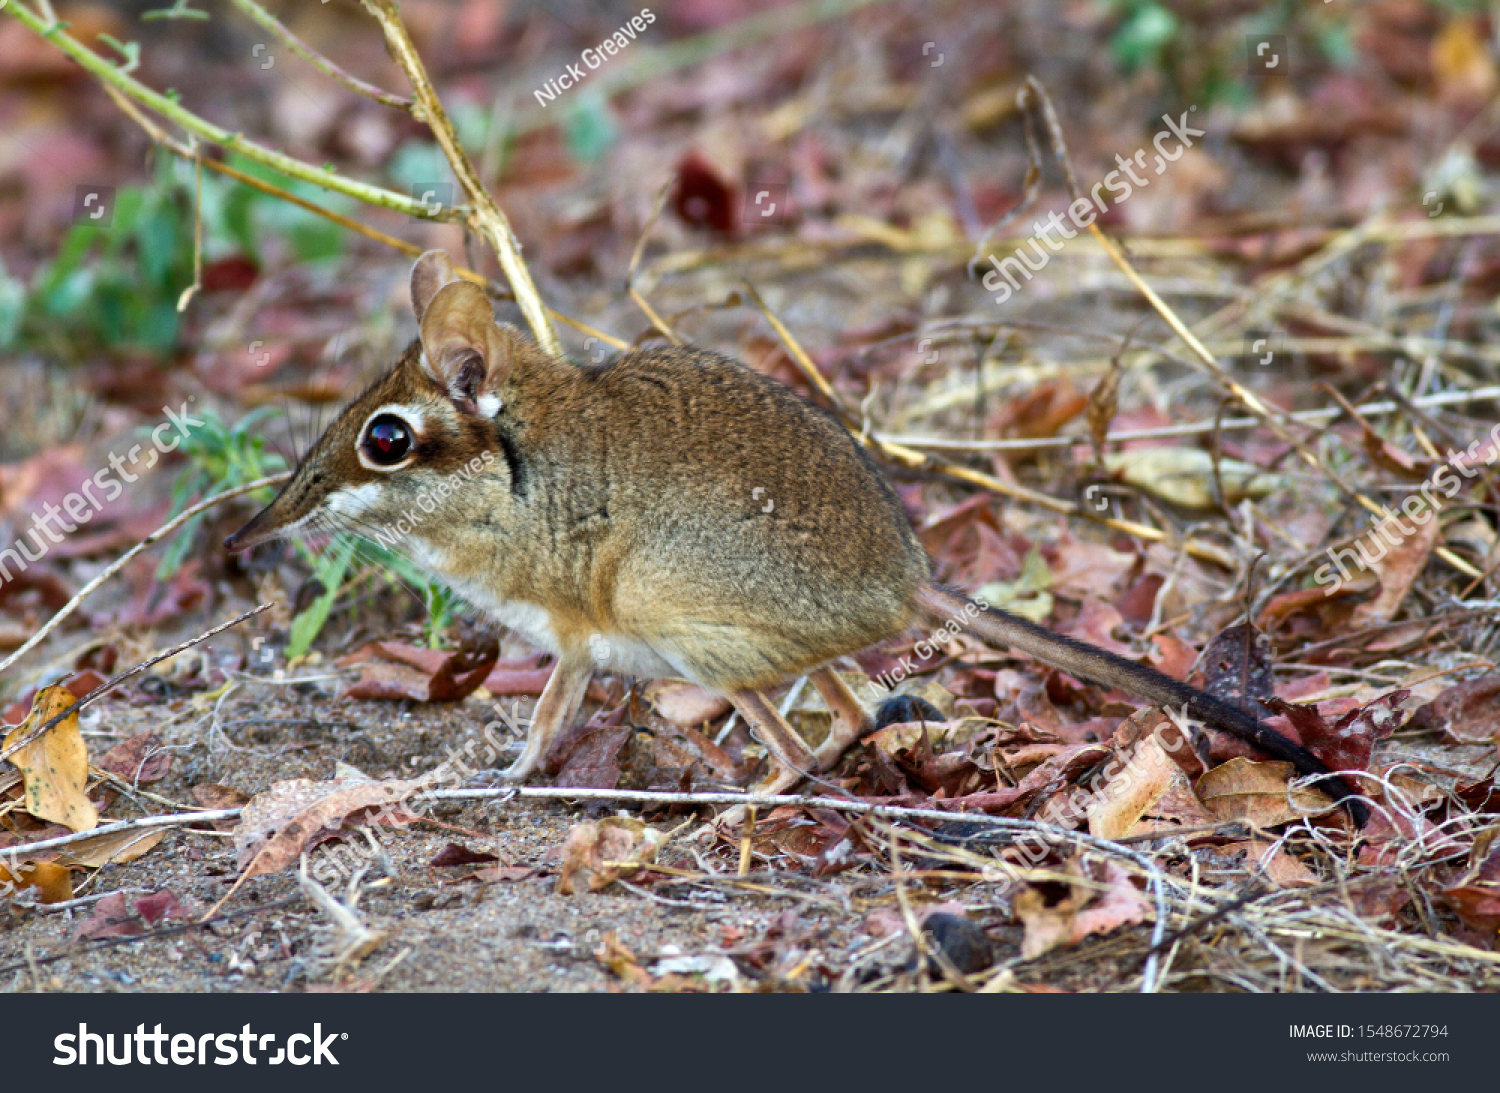 The Four-toed Elephant Shrew or Sengi is a diminutive but extremely active hunter of invertebrates running along the regularly patrolled and cleared pathways in it's territory in search of food #1548672794